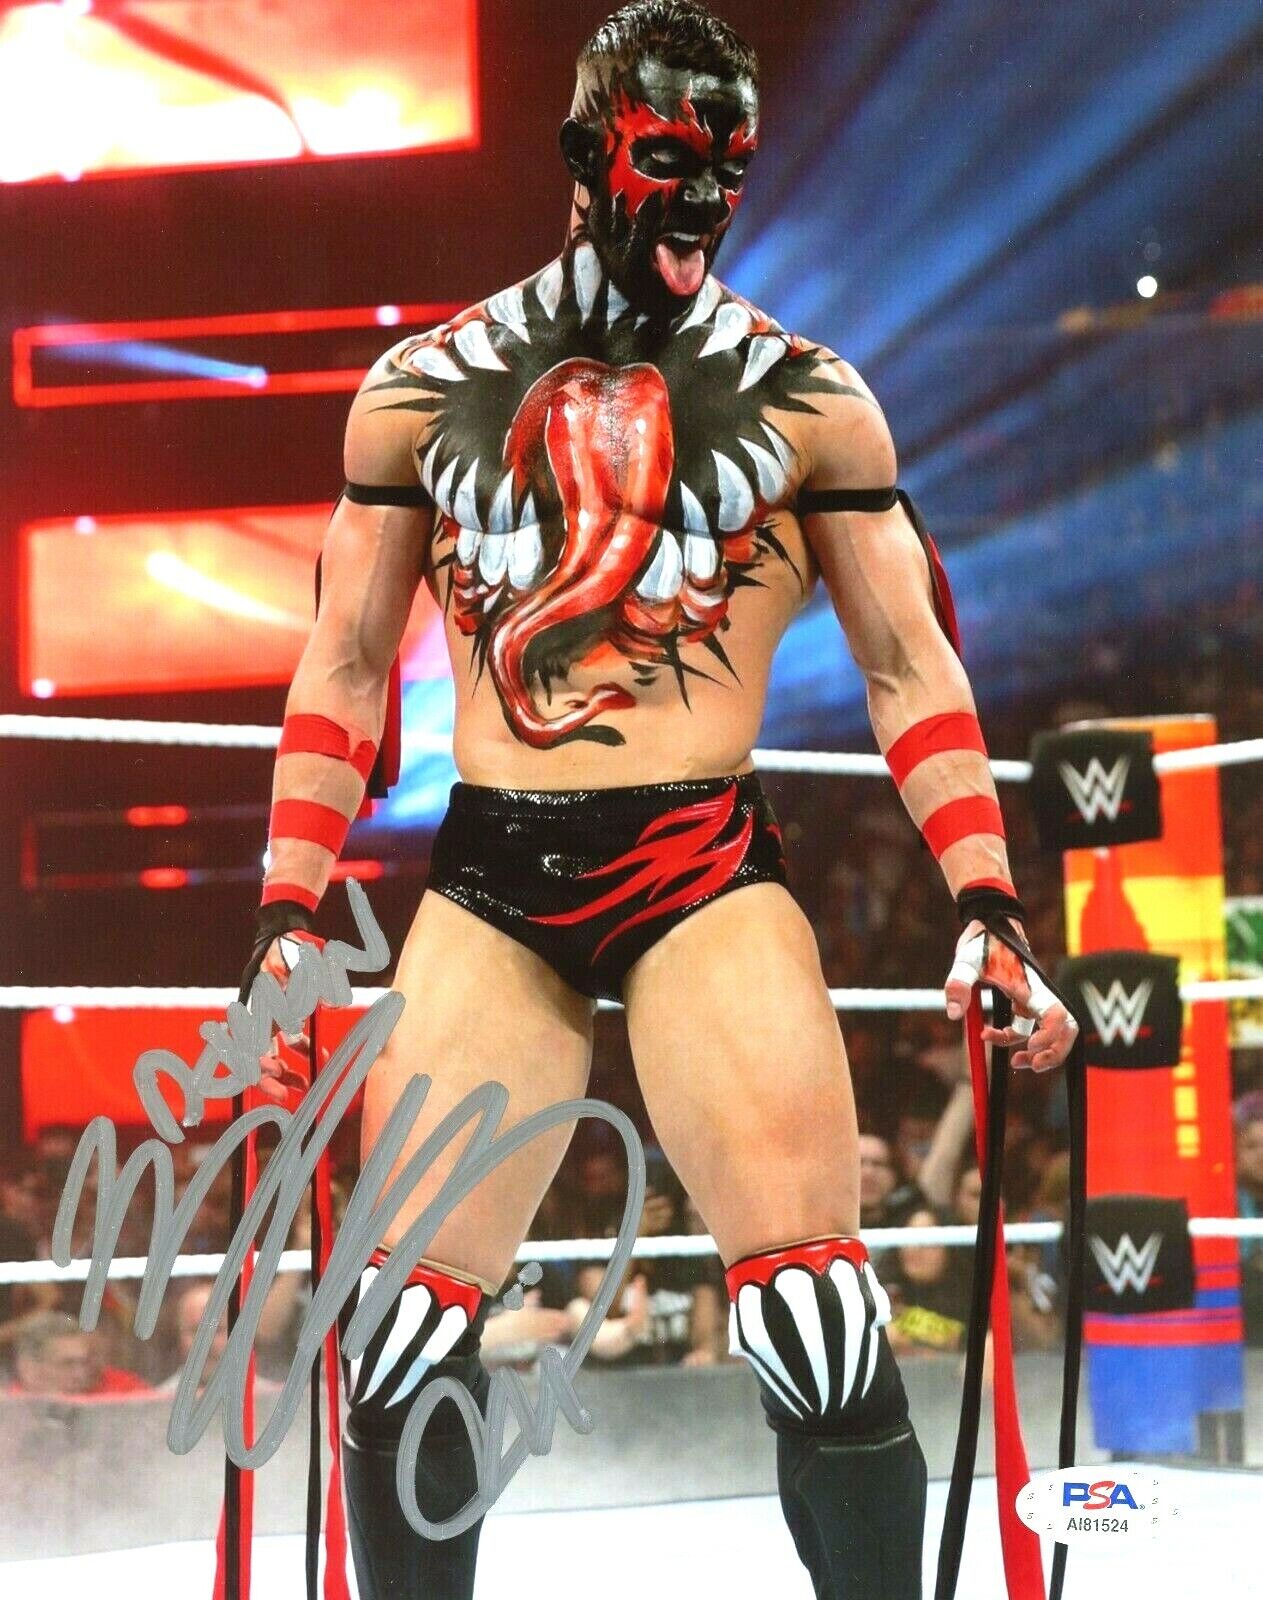 WWE FINN BALOR HAND SIGNED AUTOGRAPHED 8X10 Photo Poster painting WITH PROOF AND PSA DNA COA 25